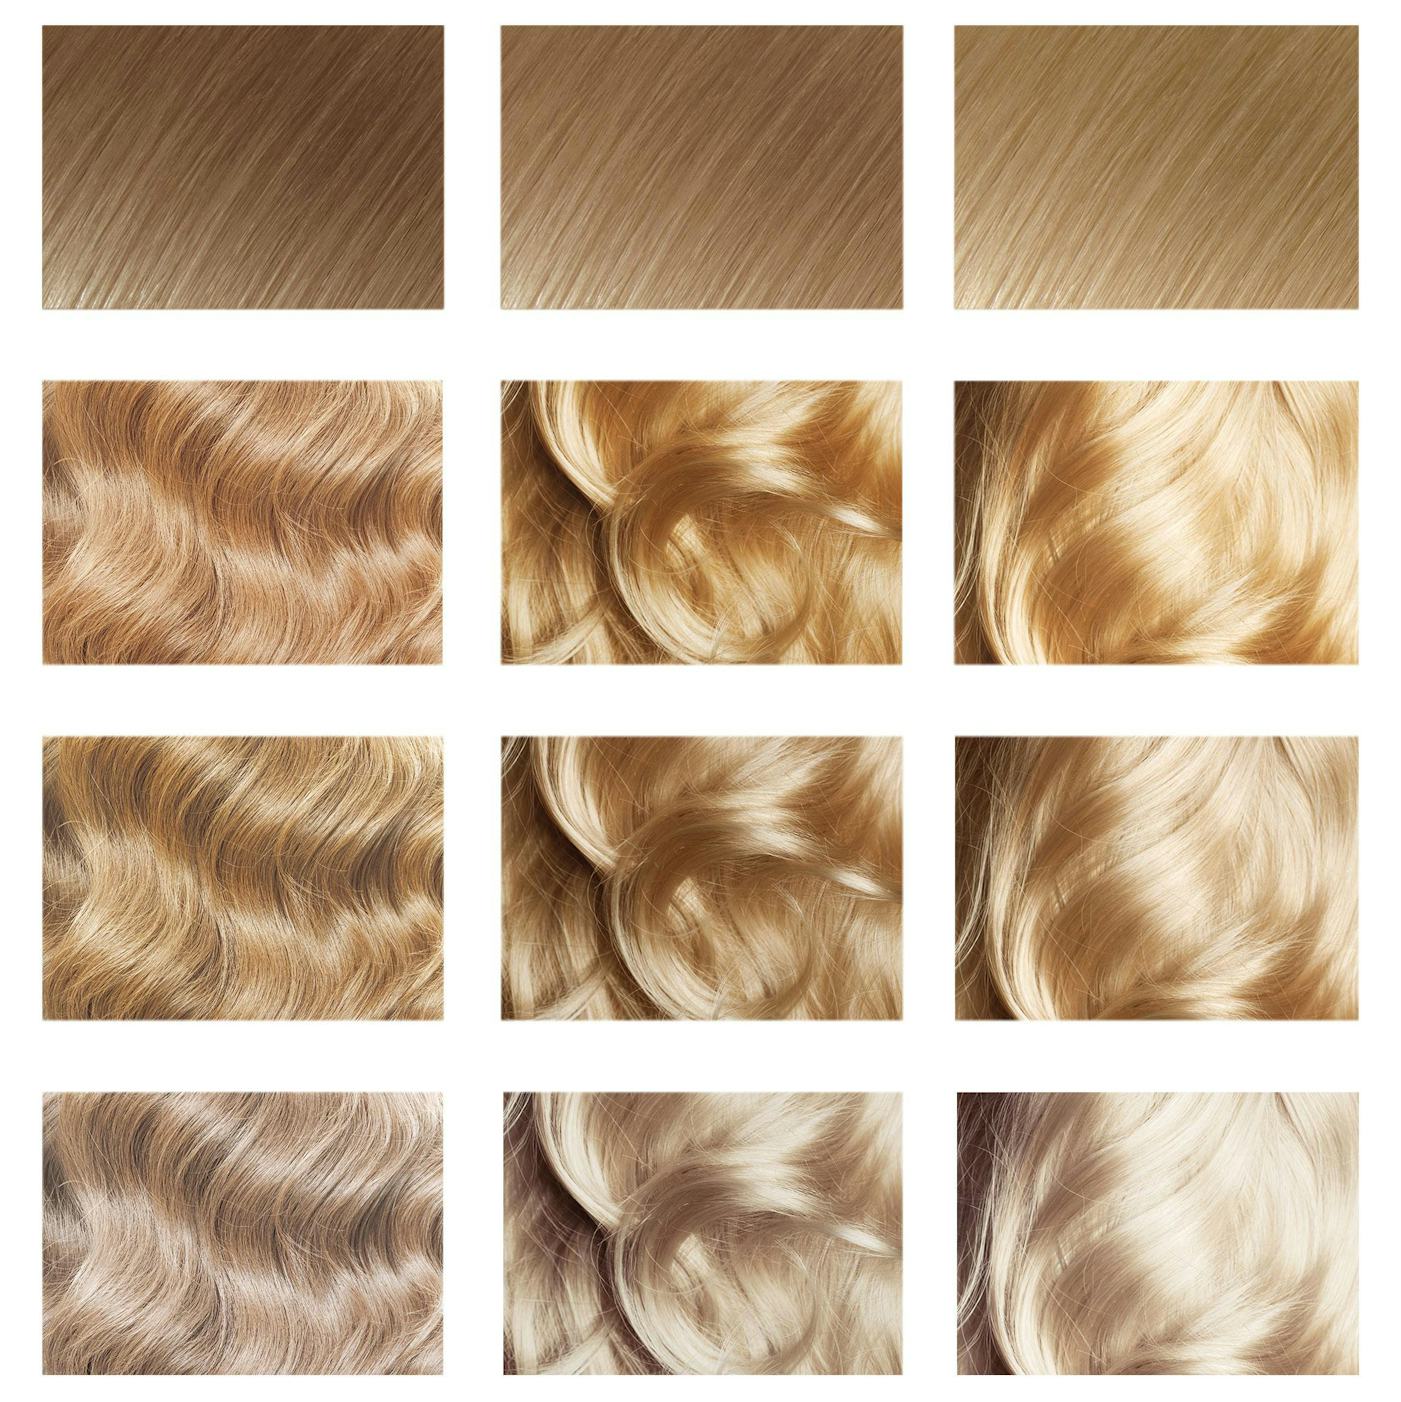 Ammonia Free High Lift Shades Lighten Hair Up To 3 Levels Without Damage Or Brassiness